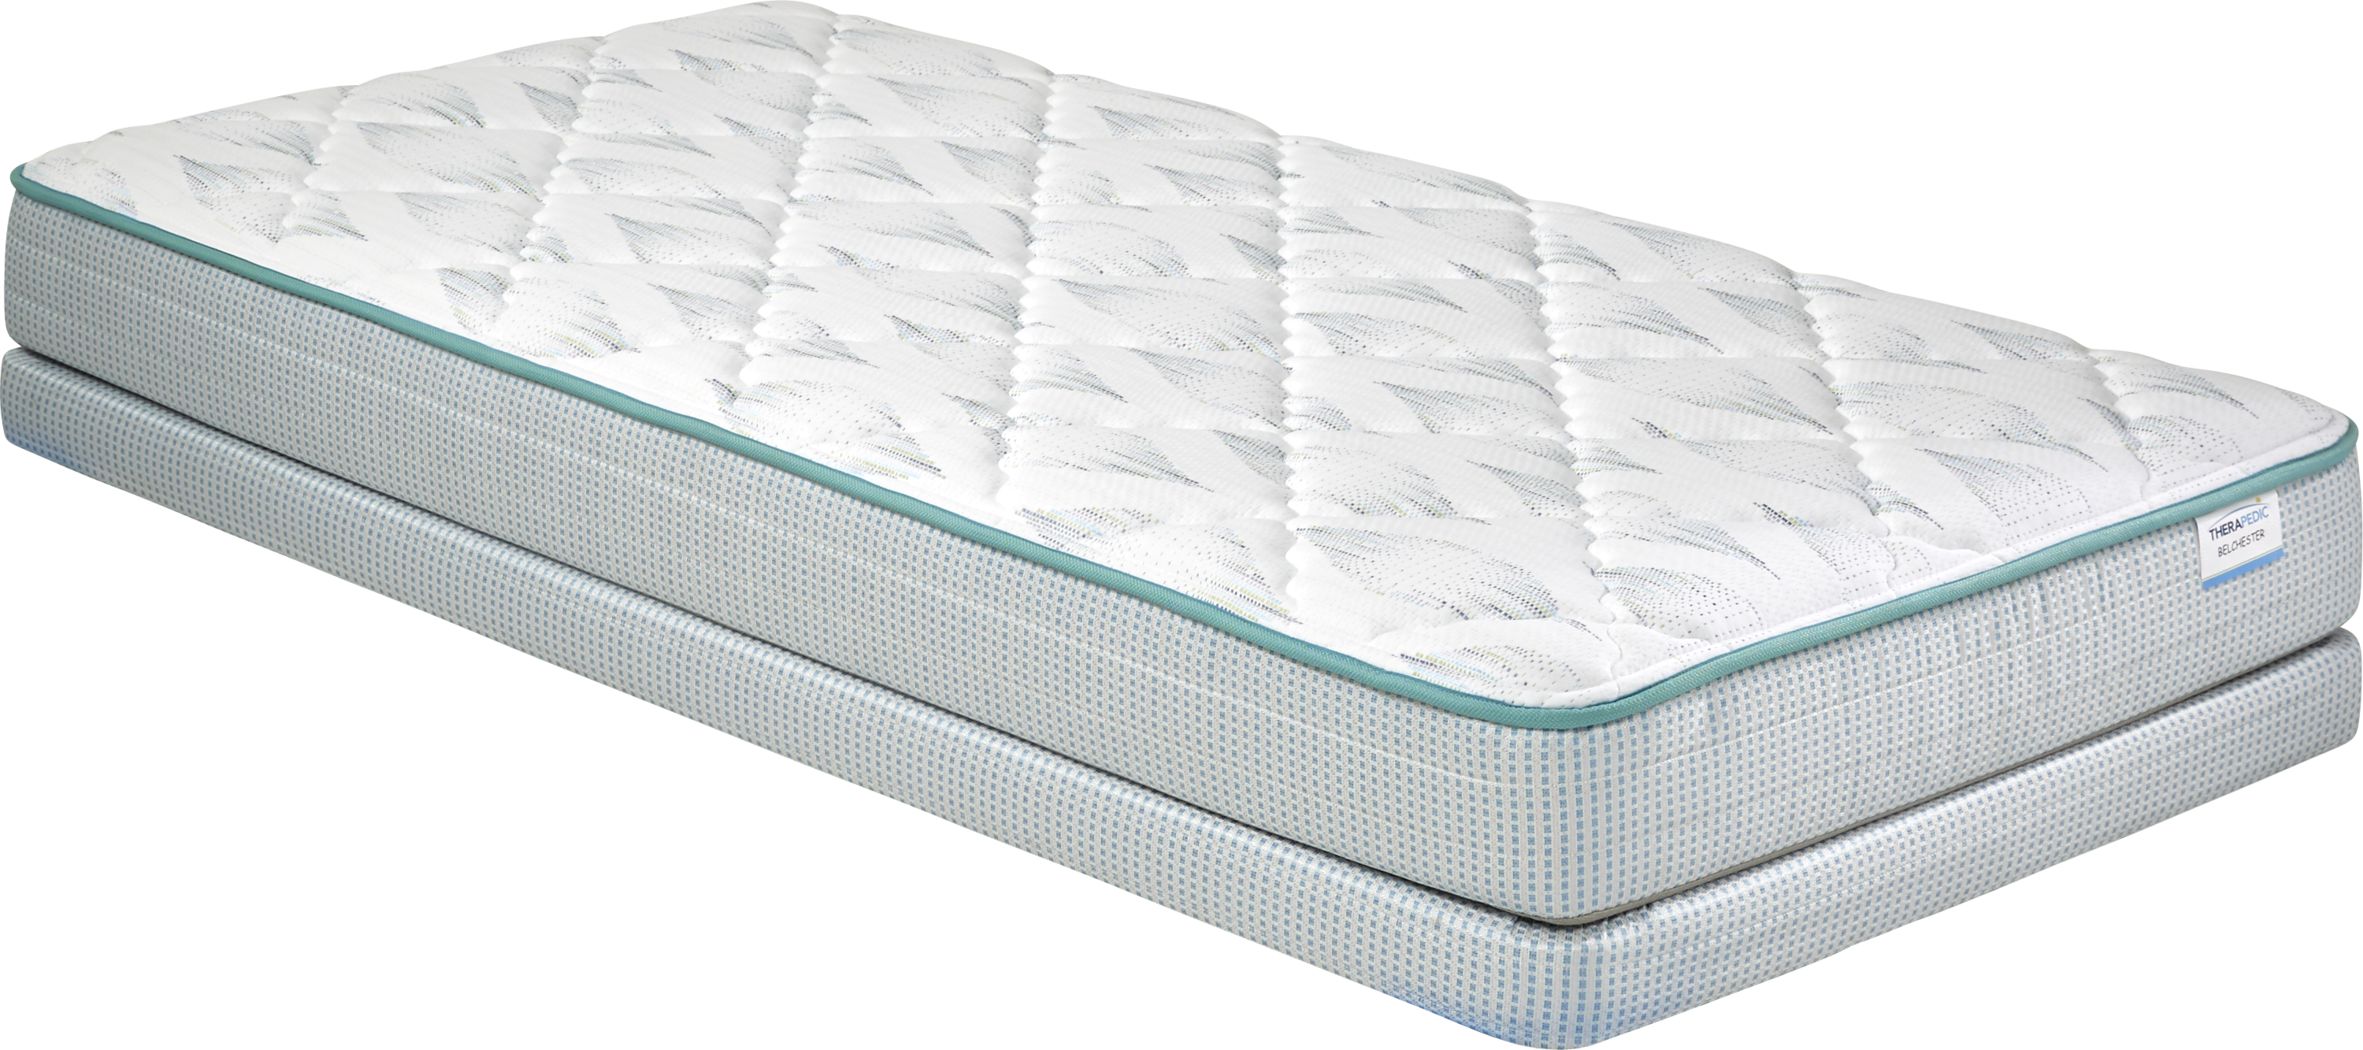 low profile twin mattress cover